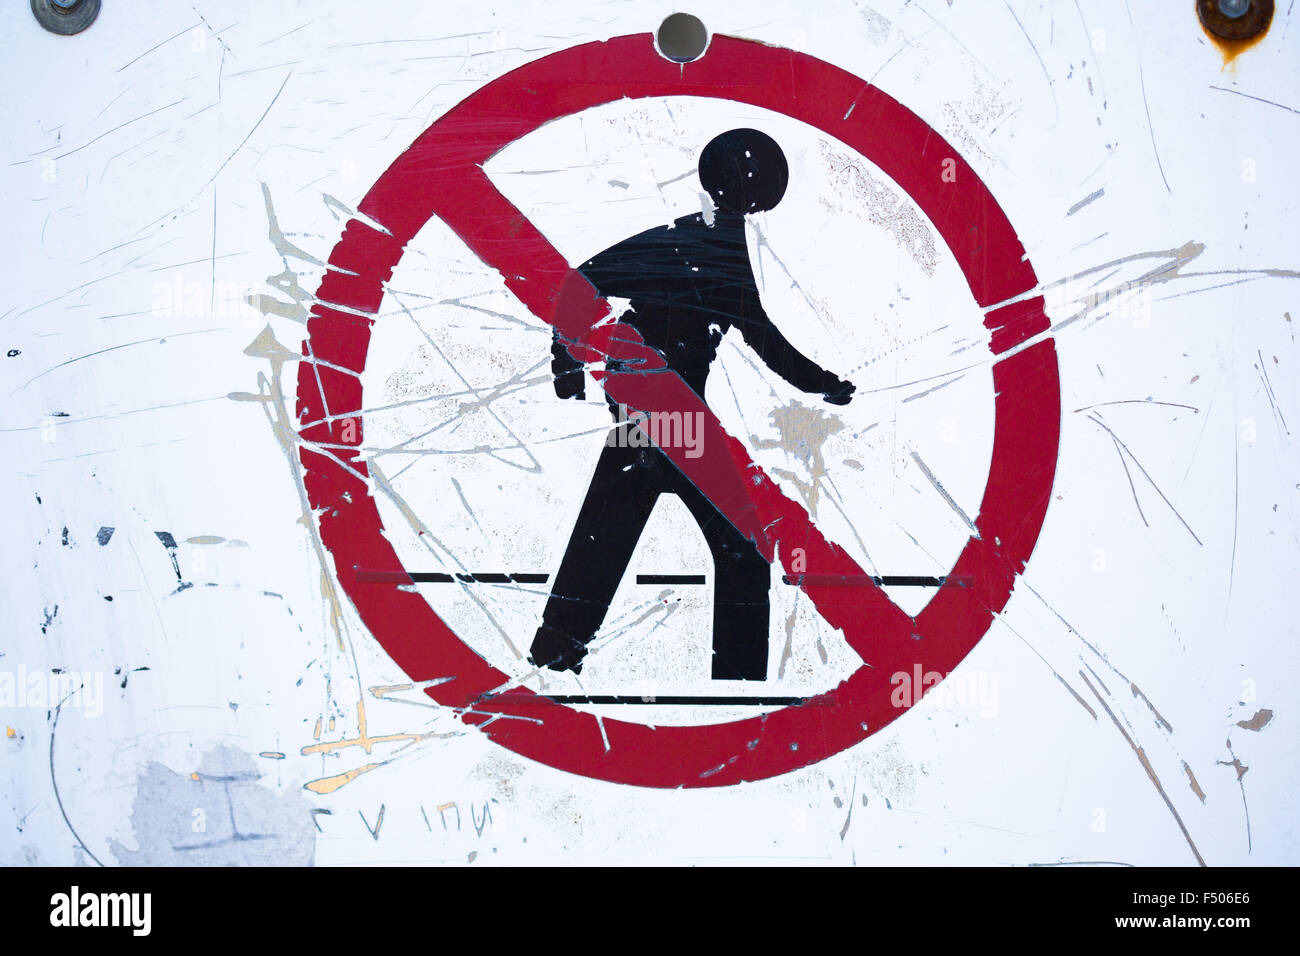 A scratched and weathered no walking / no entry sign Stock Photo